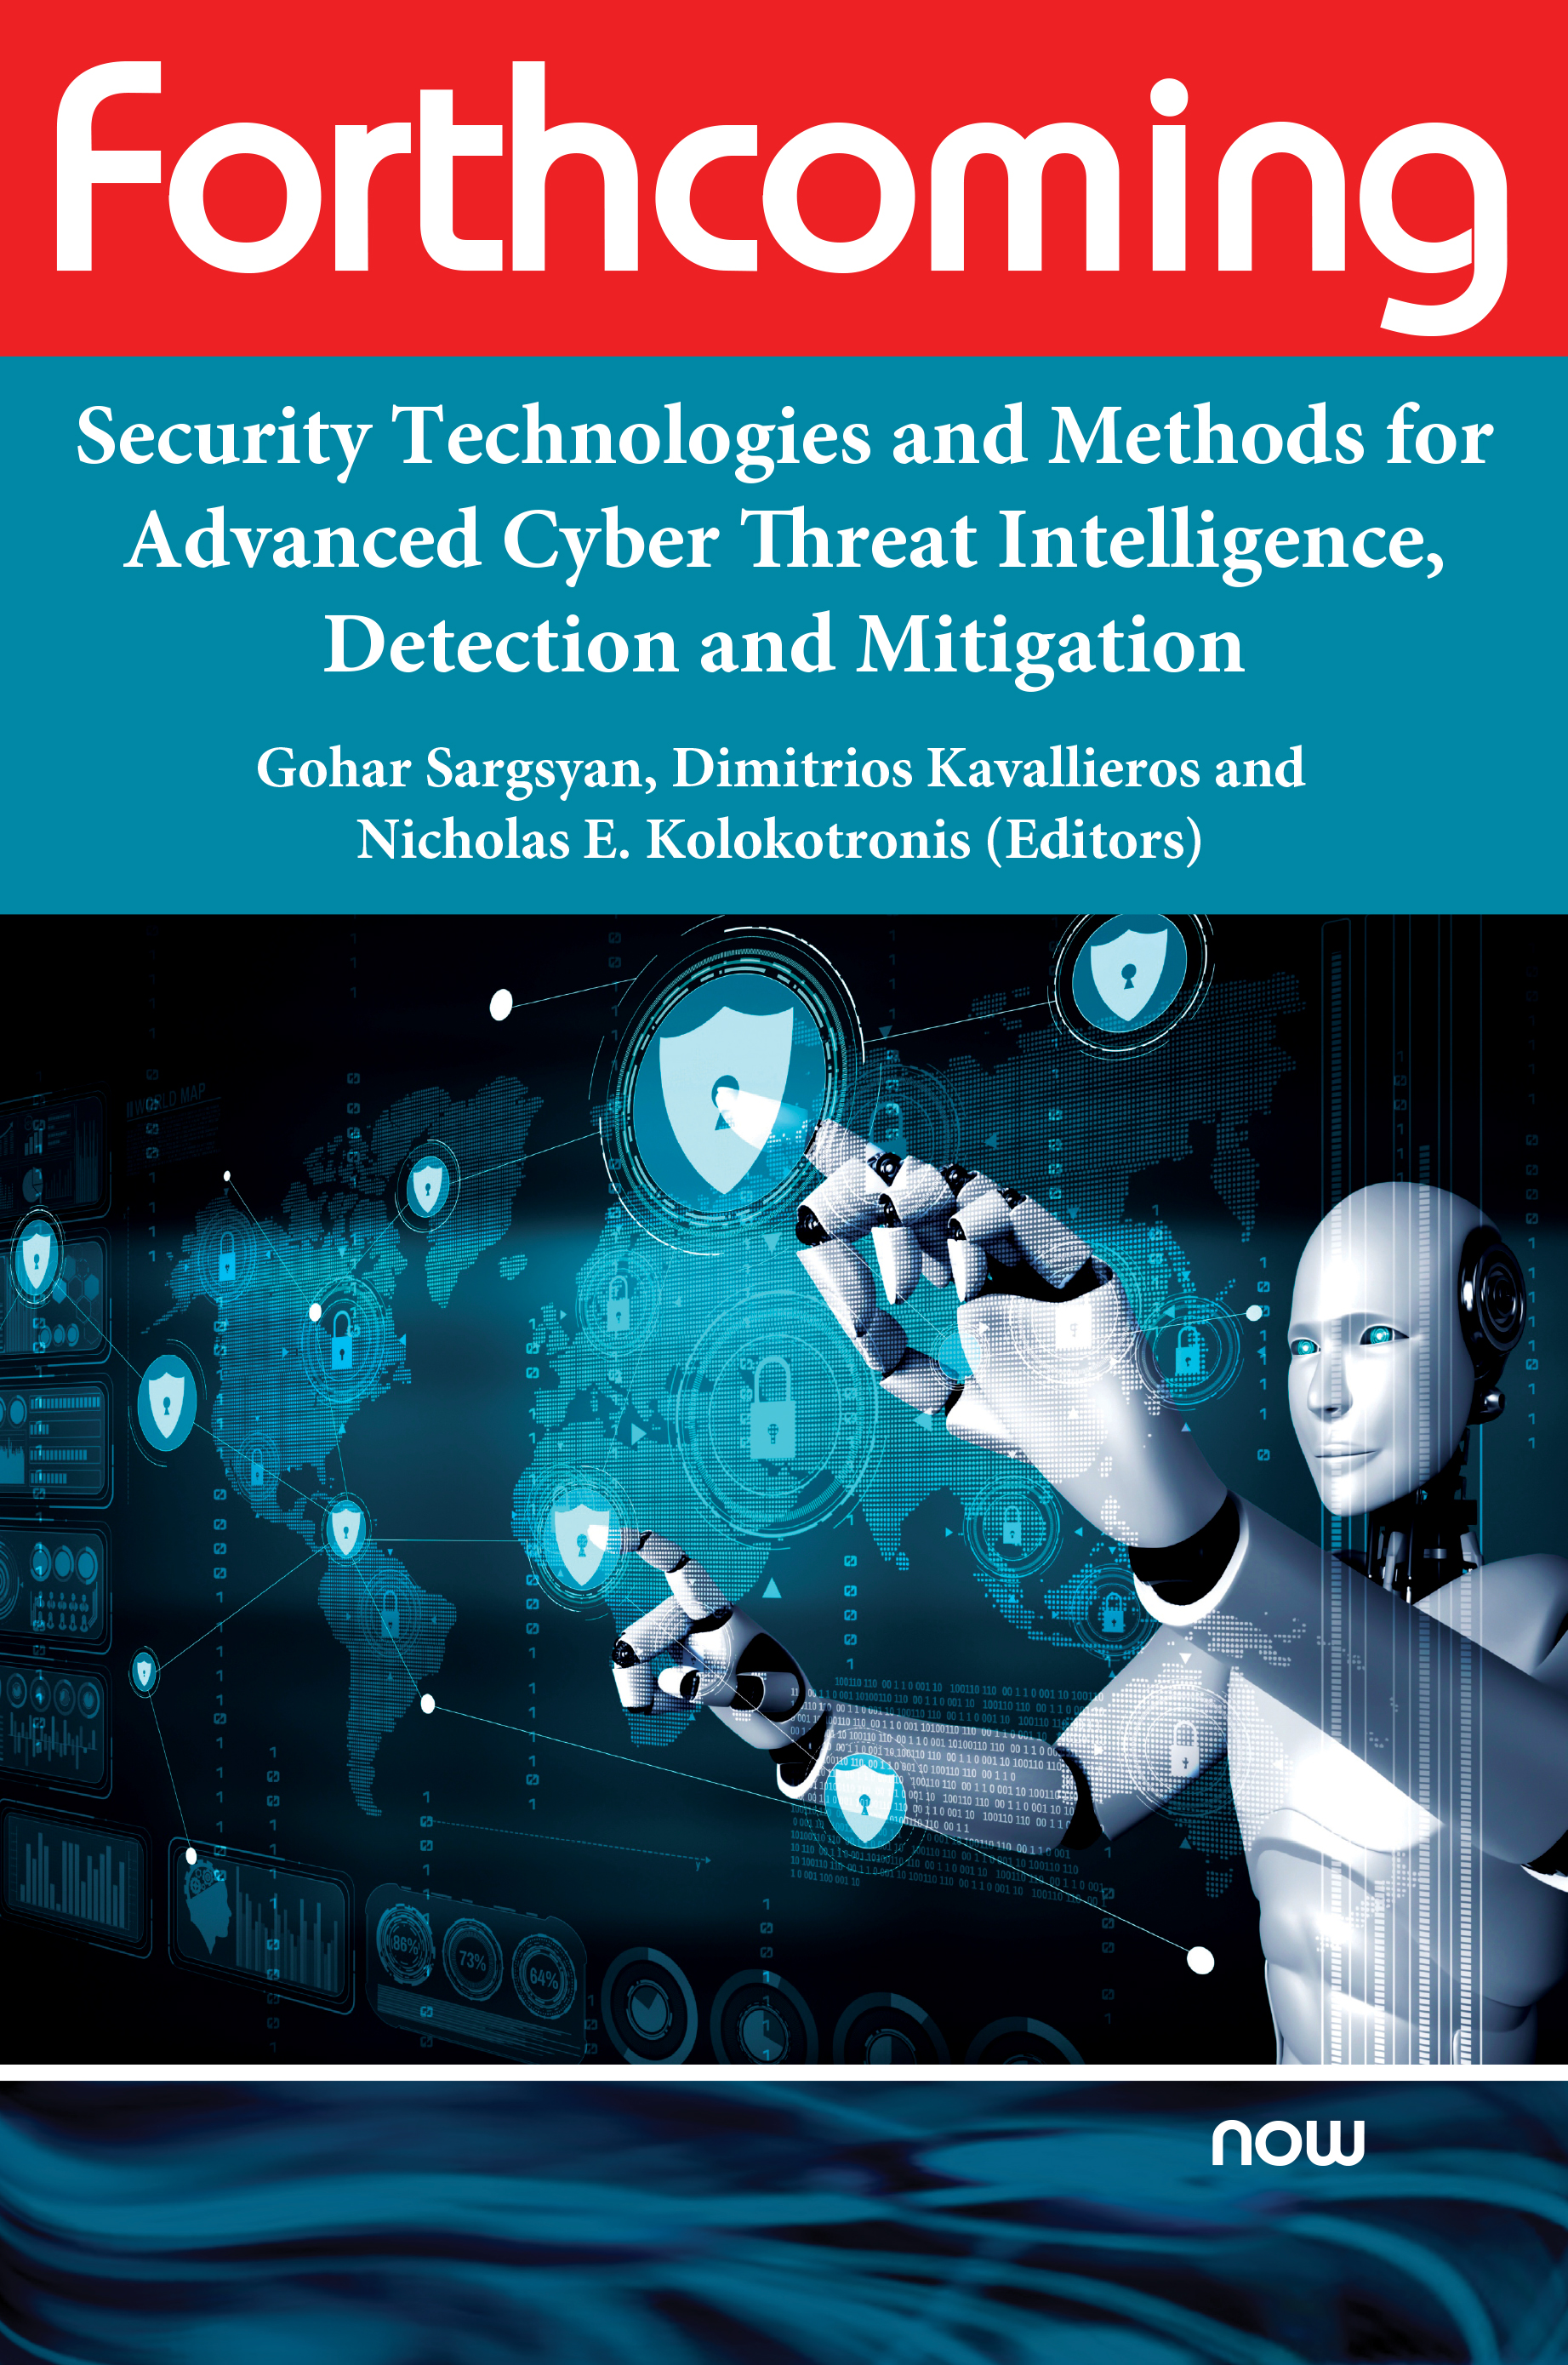 Security Technologies and Methods for Advanced Cyber Threat Intelligence, Detection and Mitigation